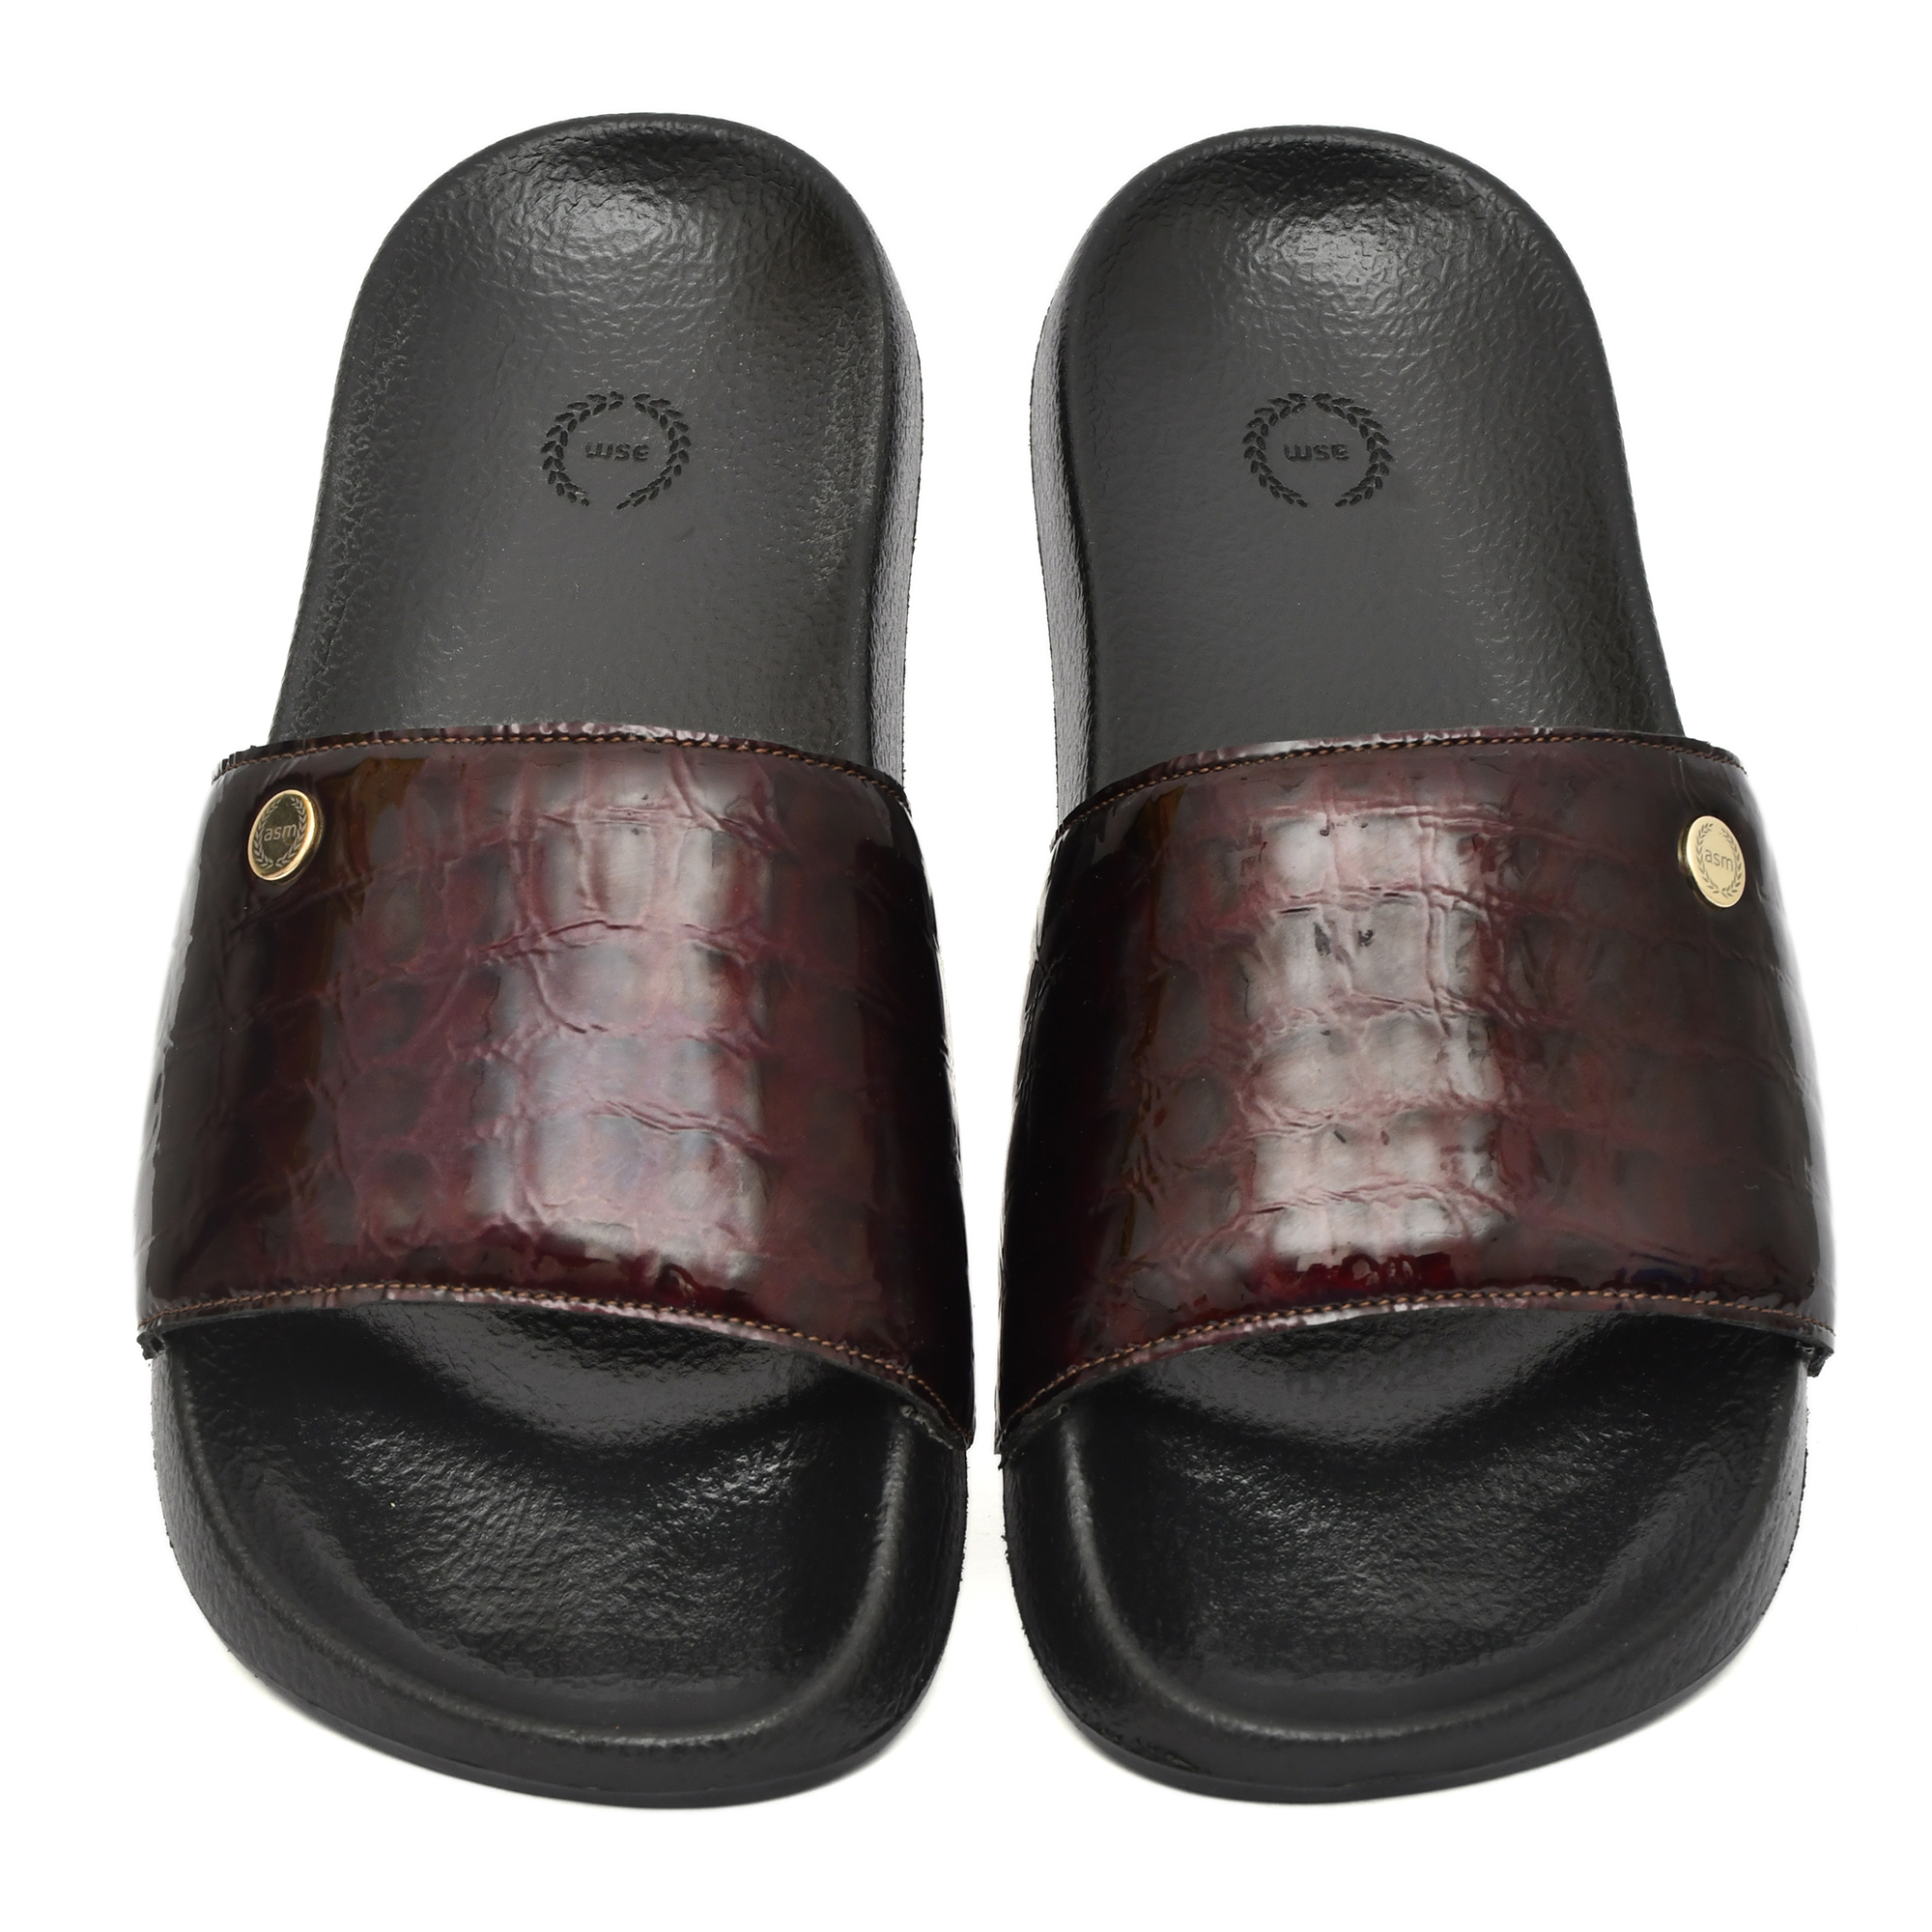 Wine Alligator Embossed Leather Slippers for Men by asm.